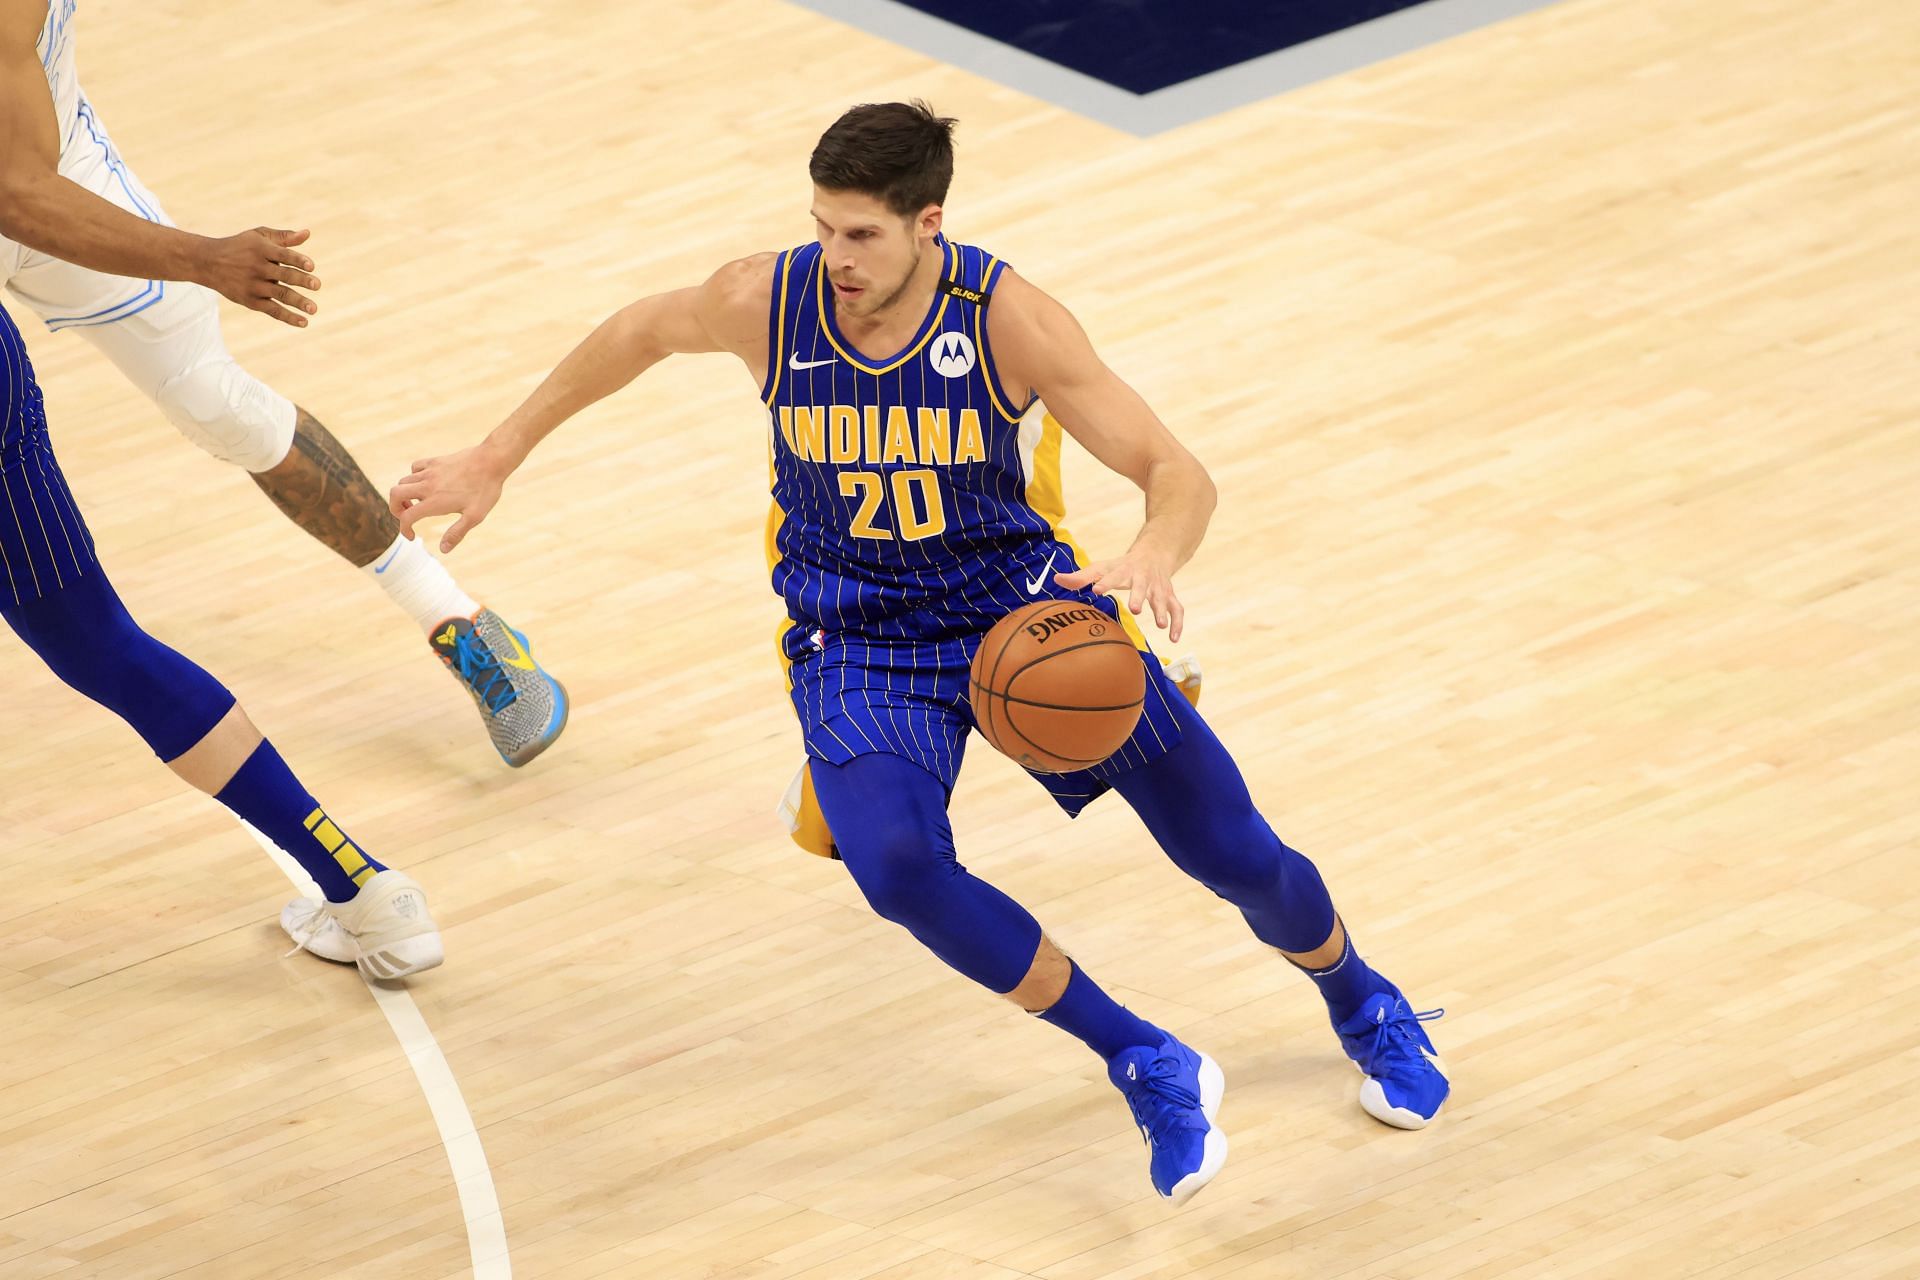 Doug McDermott played for the Indiana Pacers last season